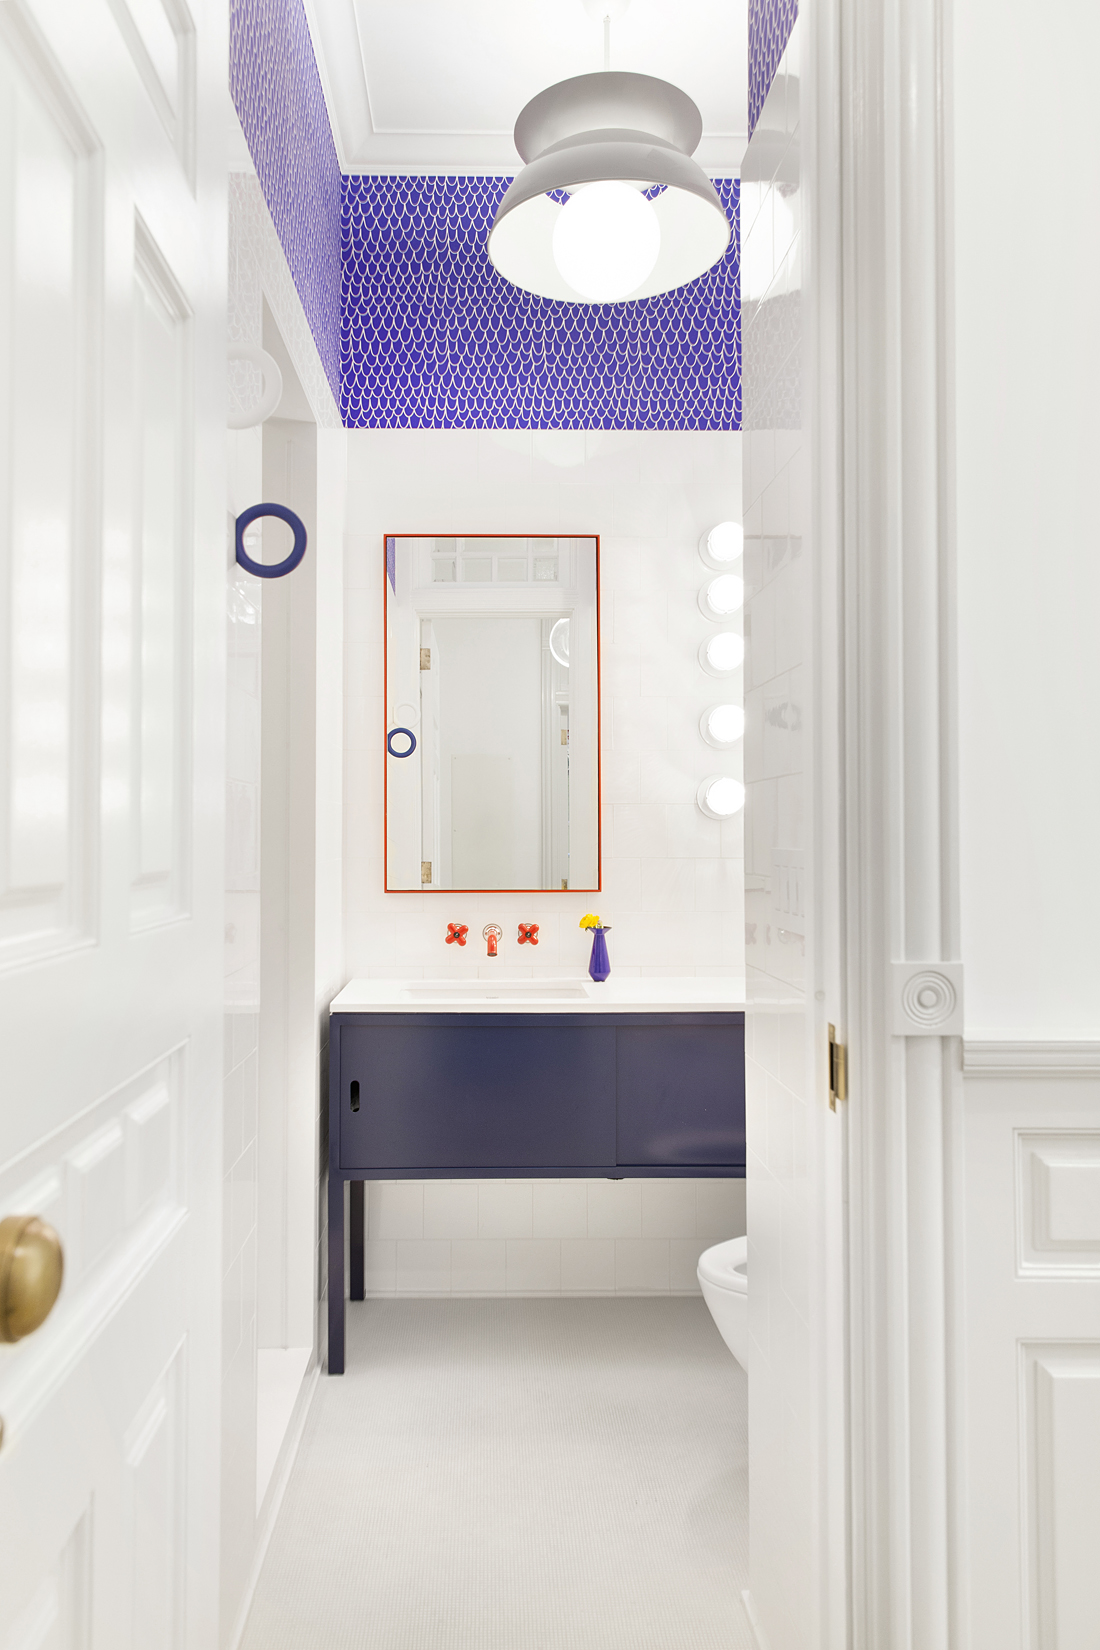 Kids Bathroom by Reunion Goods & Services and Fogarty Finger Architecture